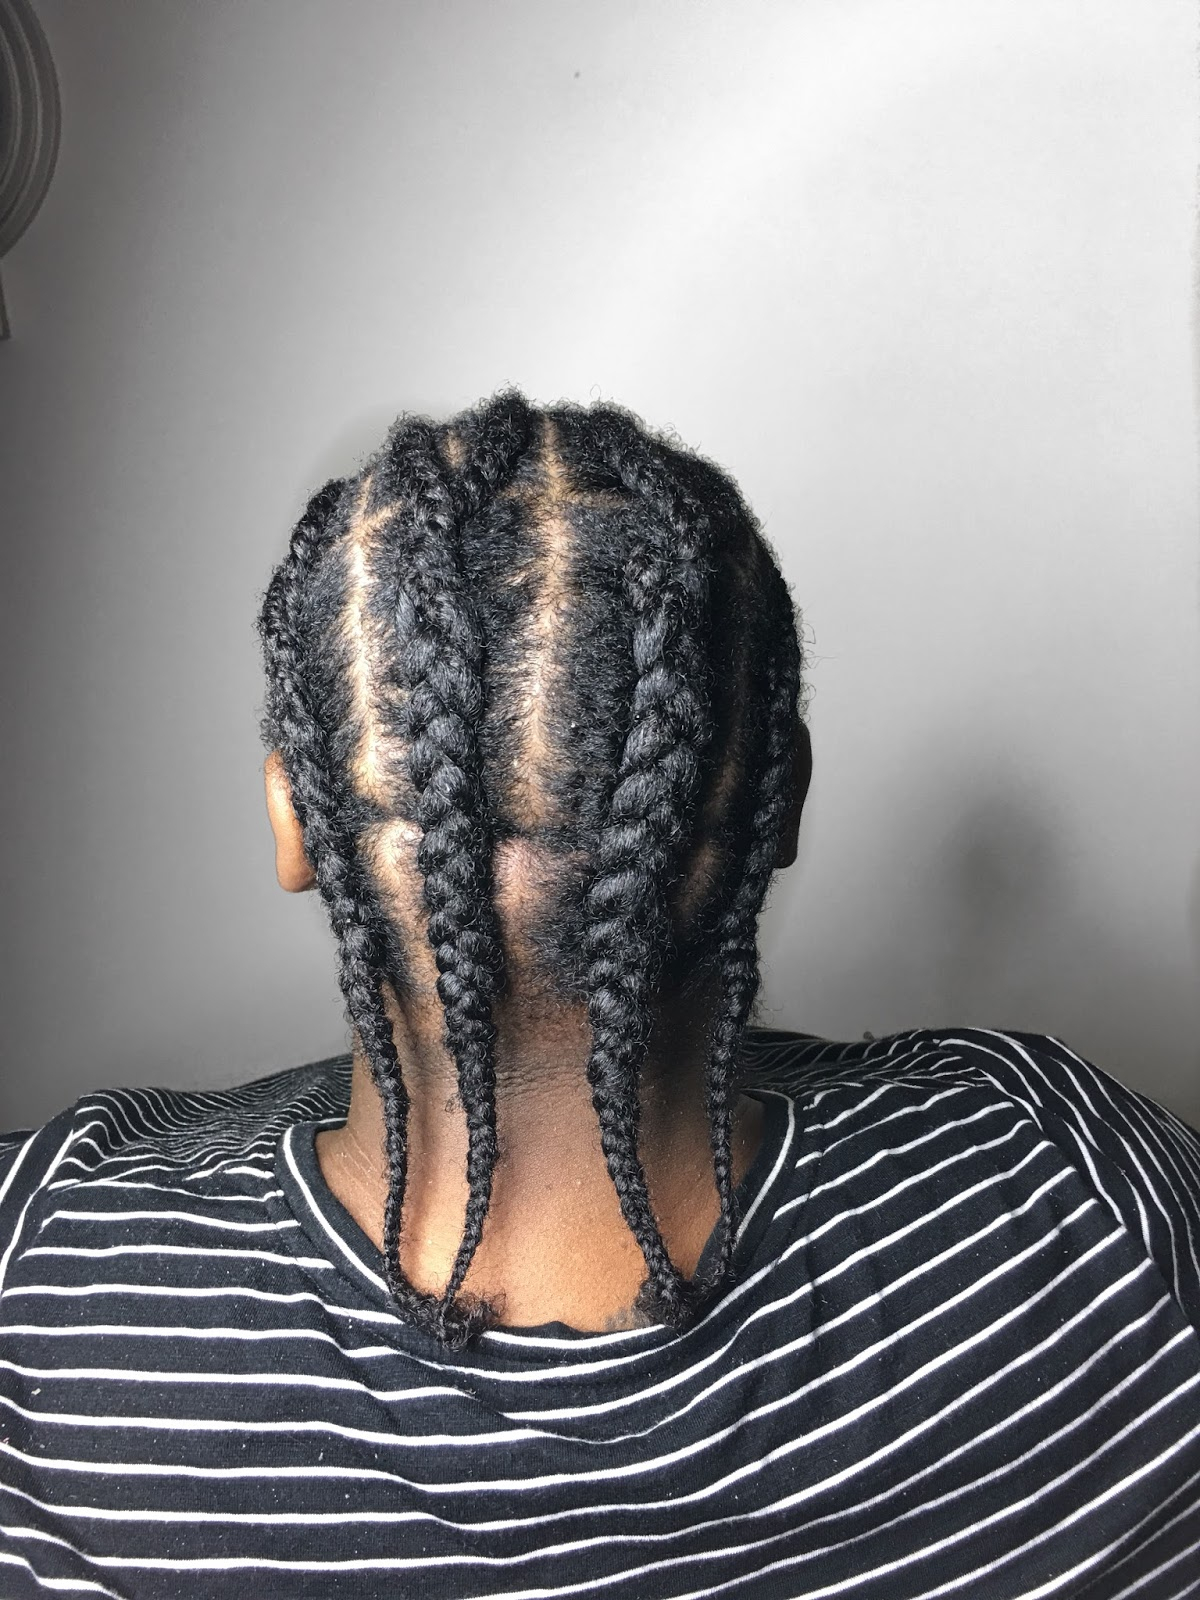 Best Crochet Braid Pattern Crochet Braids 101 Ft Latched And Hooked Giveaway Simply Curvee